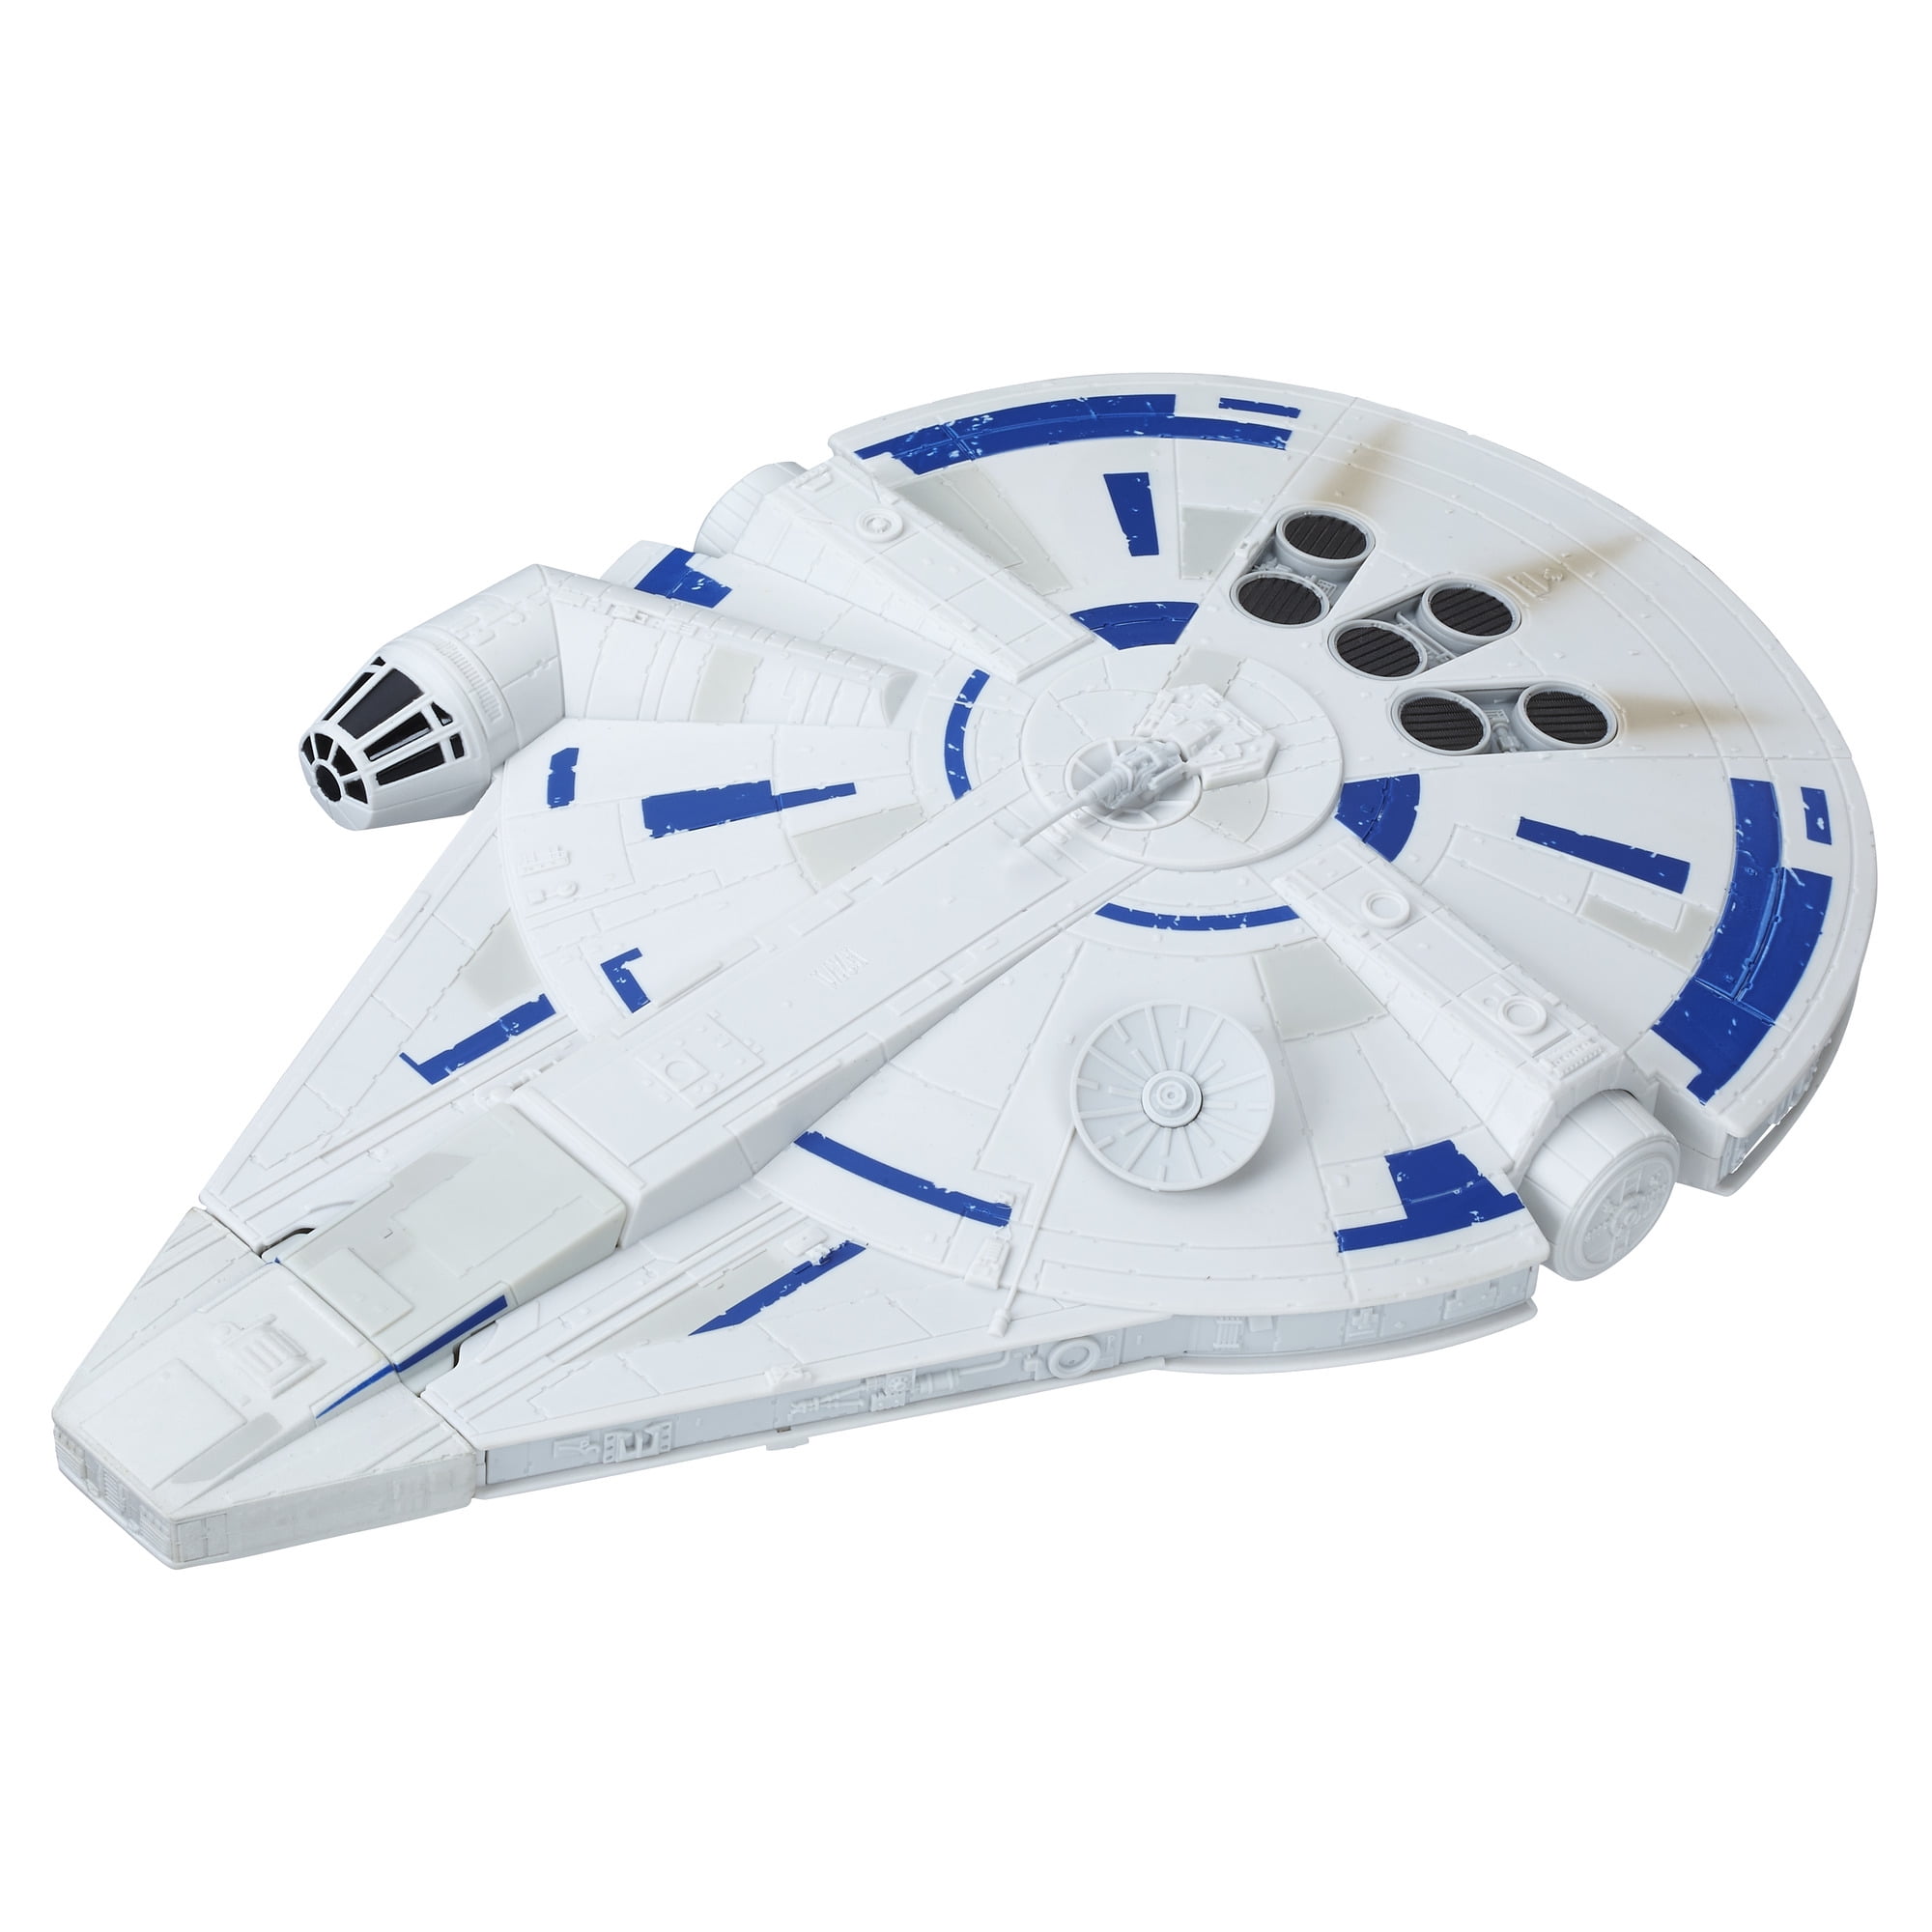 Hasbro Star Wars A SOLO STORY Force Link 2.0 Millennium Falcon with Escape Craft